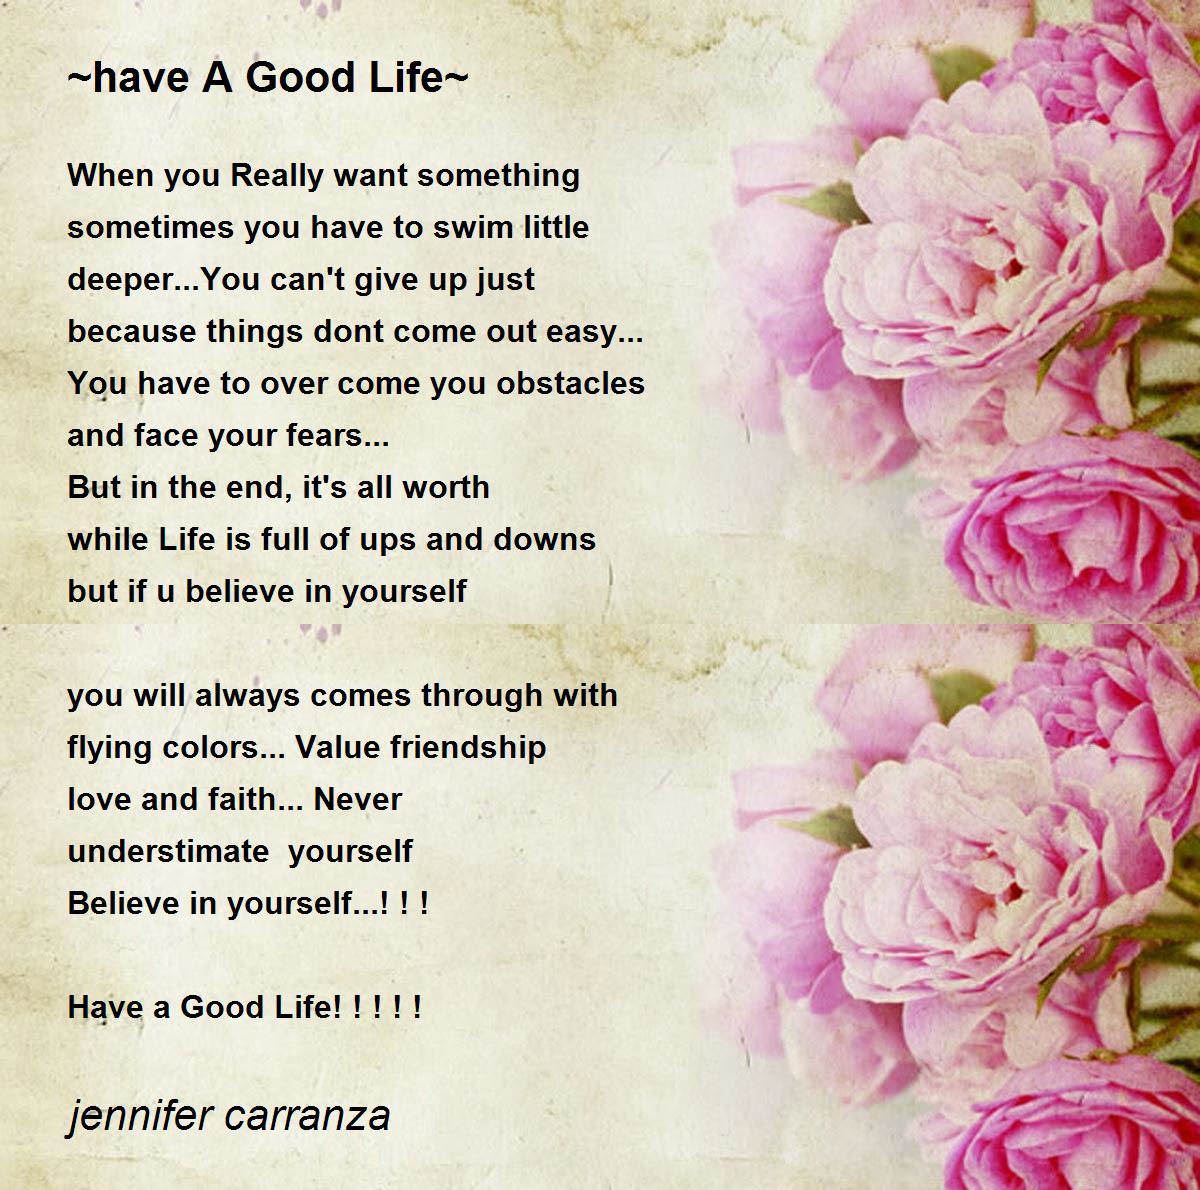 ~have A Good Life~ - ~have A Good Life~ Poem by jennifer carranza